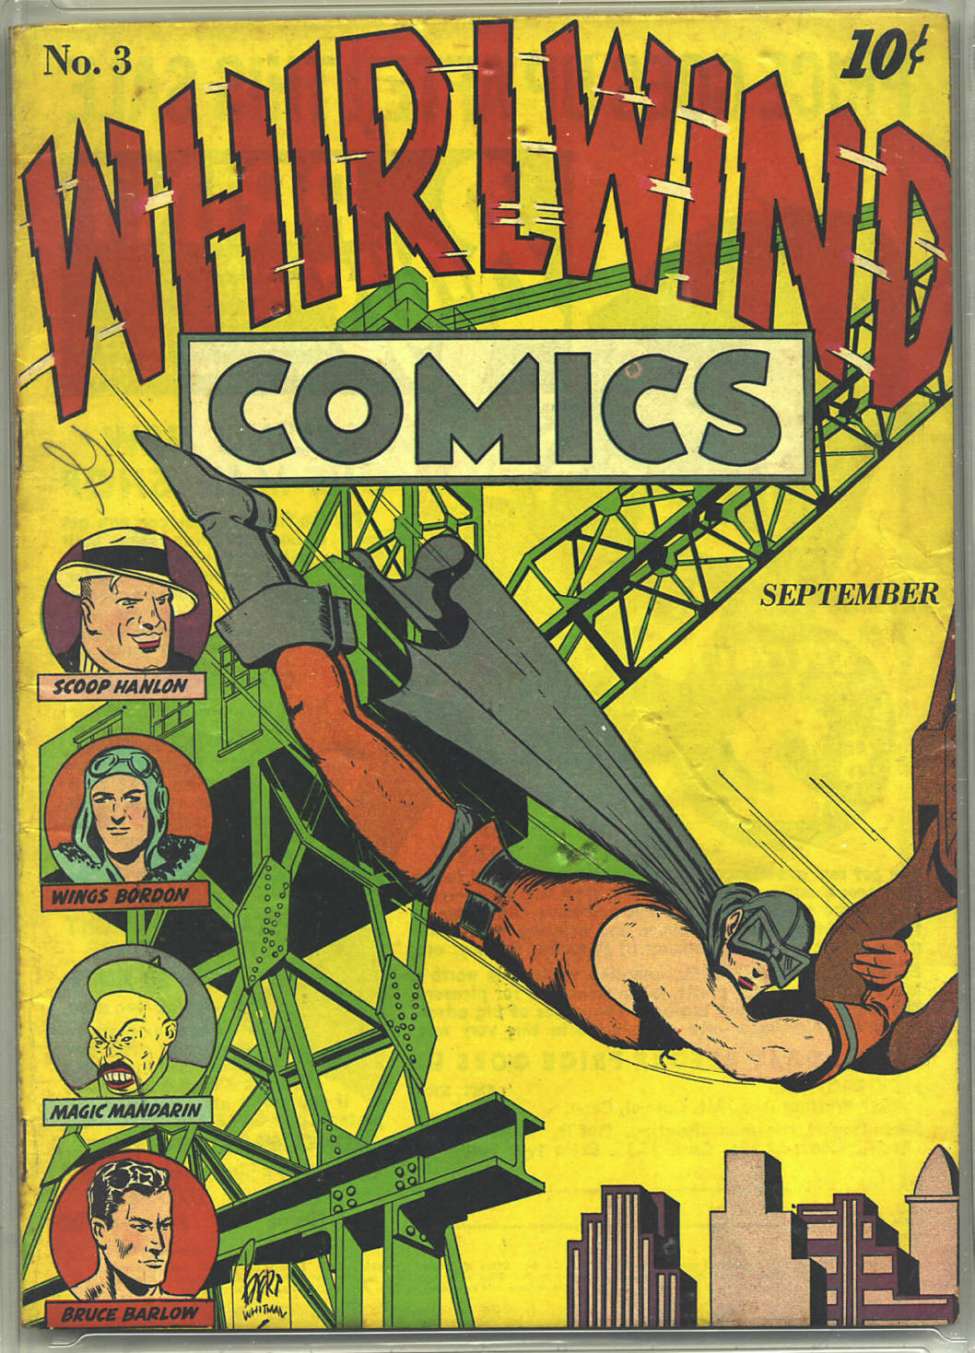 Book Cover For Whirlwind Comics 3